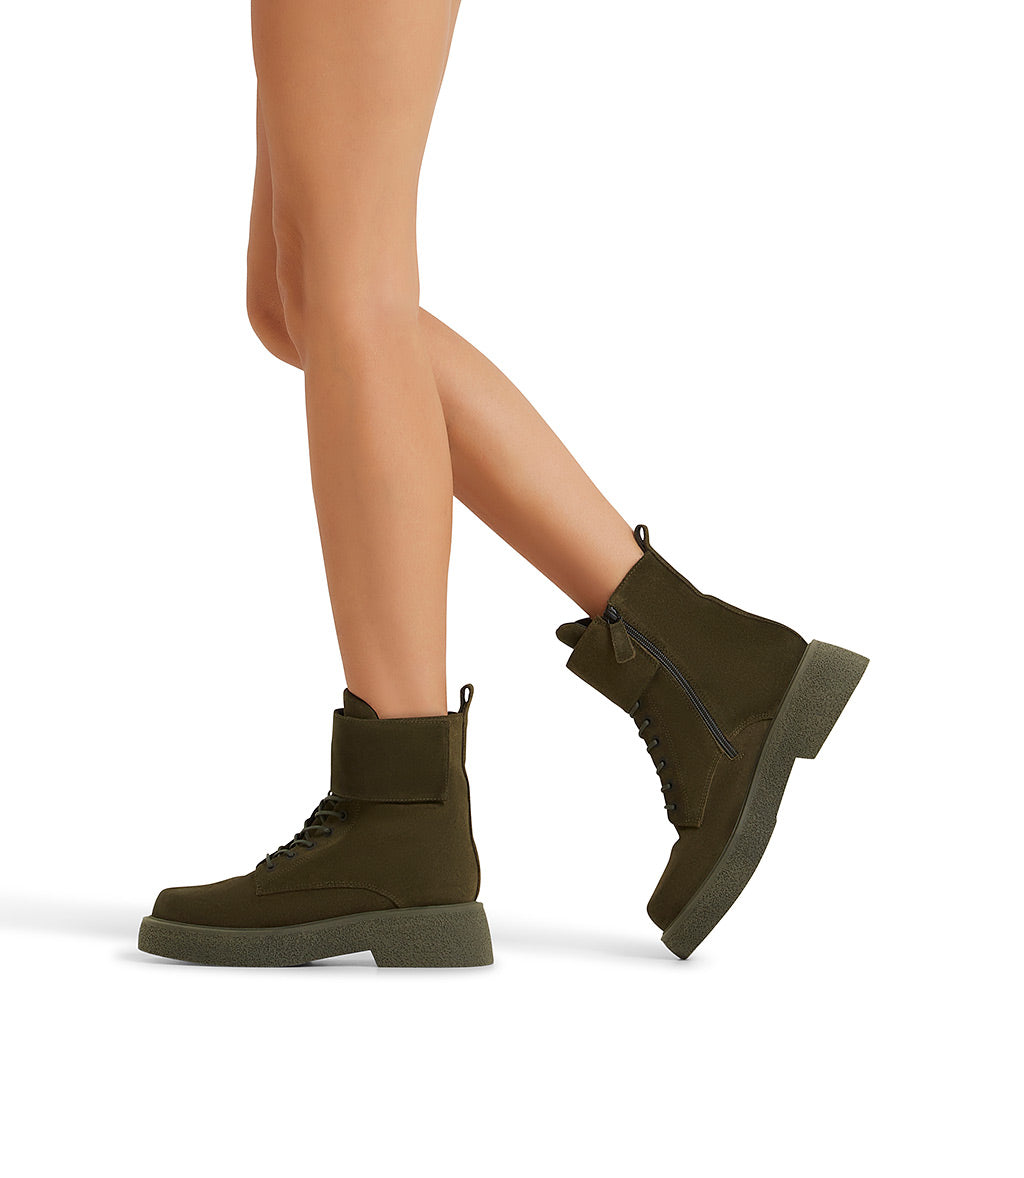 Green suede lace-up ankle boots